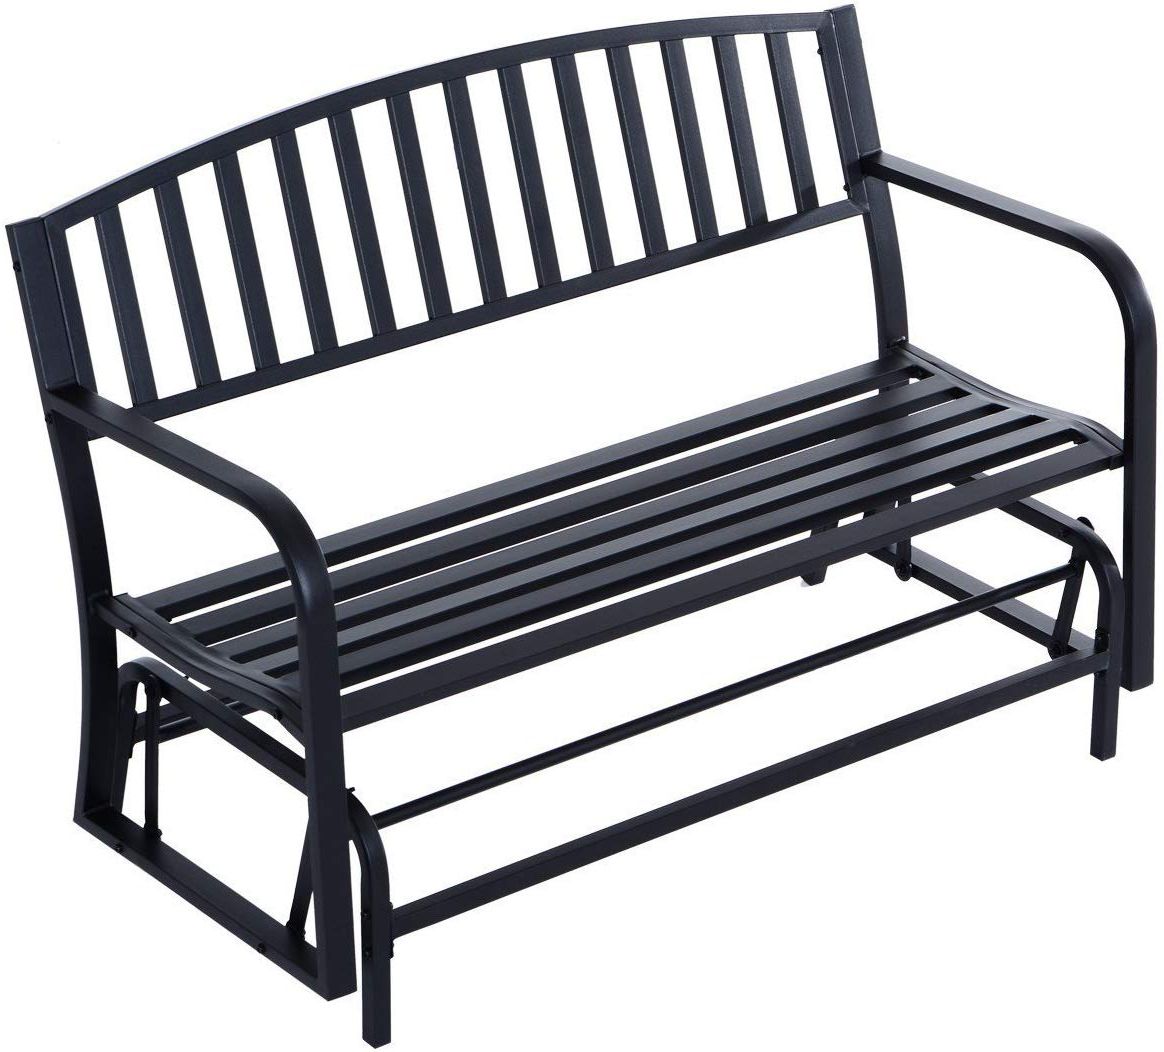 Outdoor Steel Patio Swing Glider Benches Inside Most Popular Amazon : Outdoor Bench 50" Steel Patio Swing Glider (View 3 of 30)